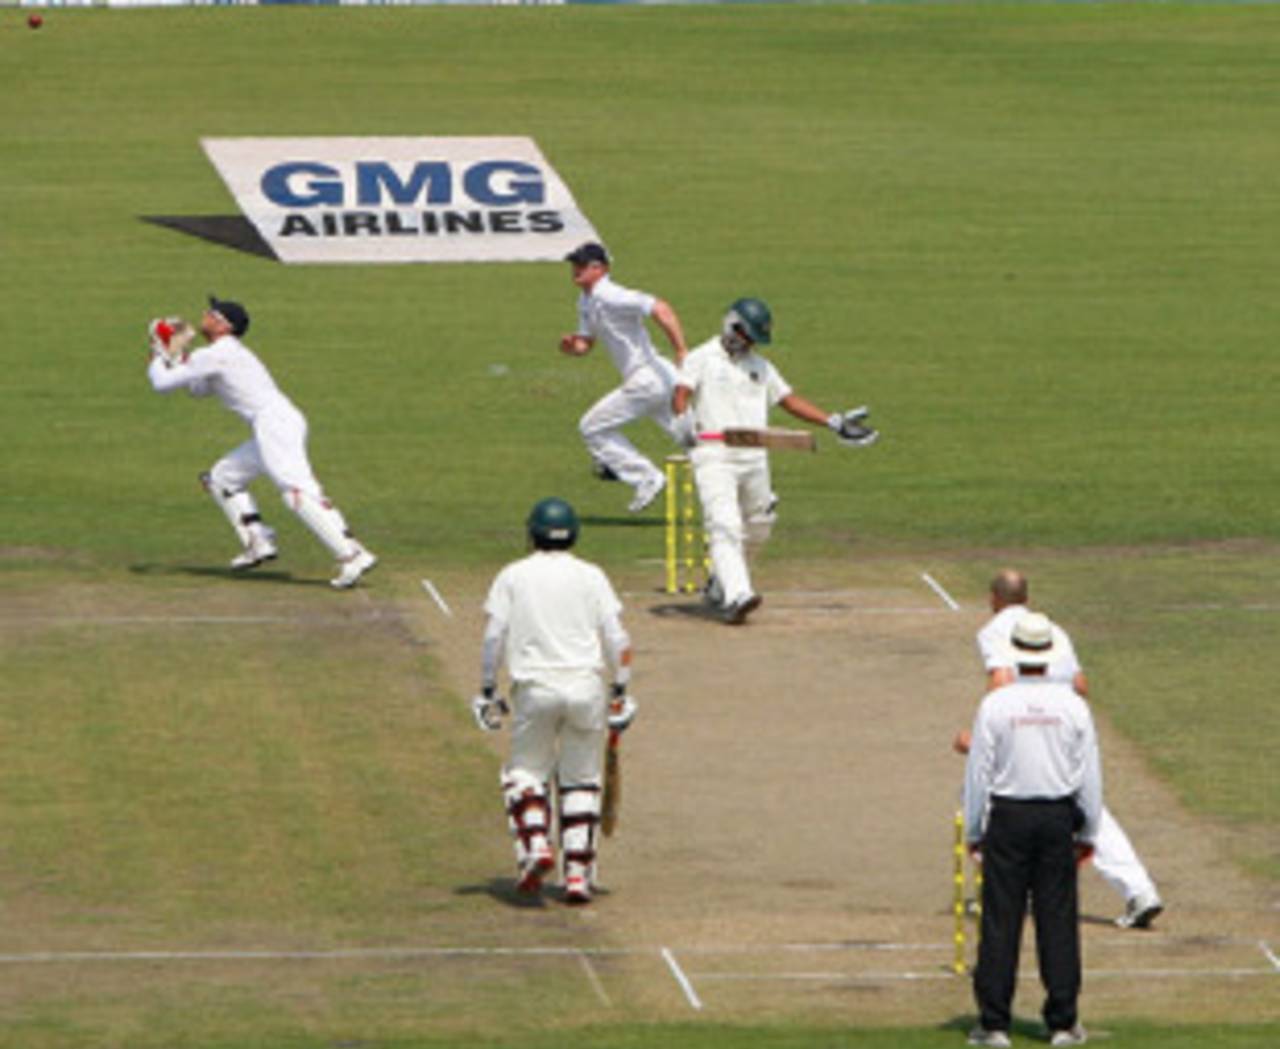 "I don't know if he gloved it but Matt Prior took the catch and he was given"&nbsp;&nbsp;&bull;&nbsp;&nbsp;Getty Images